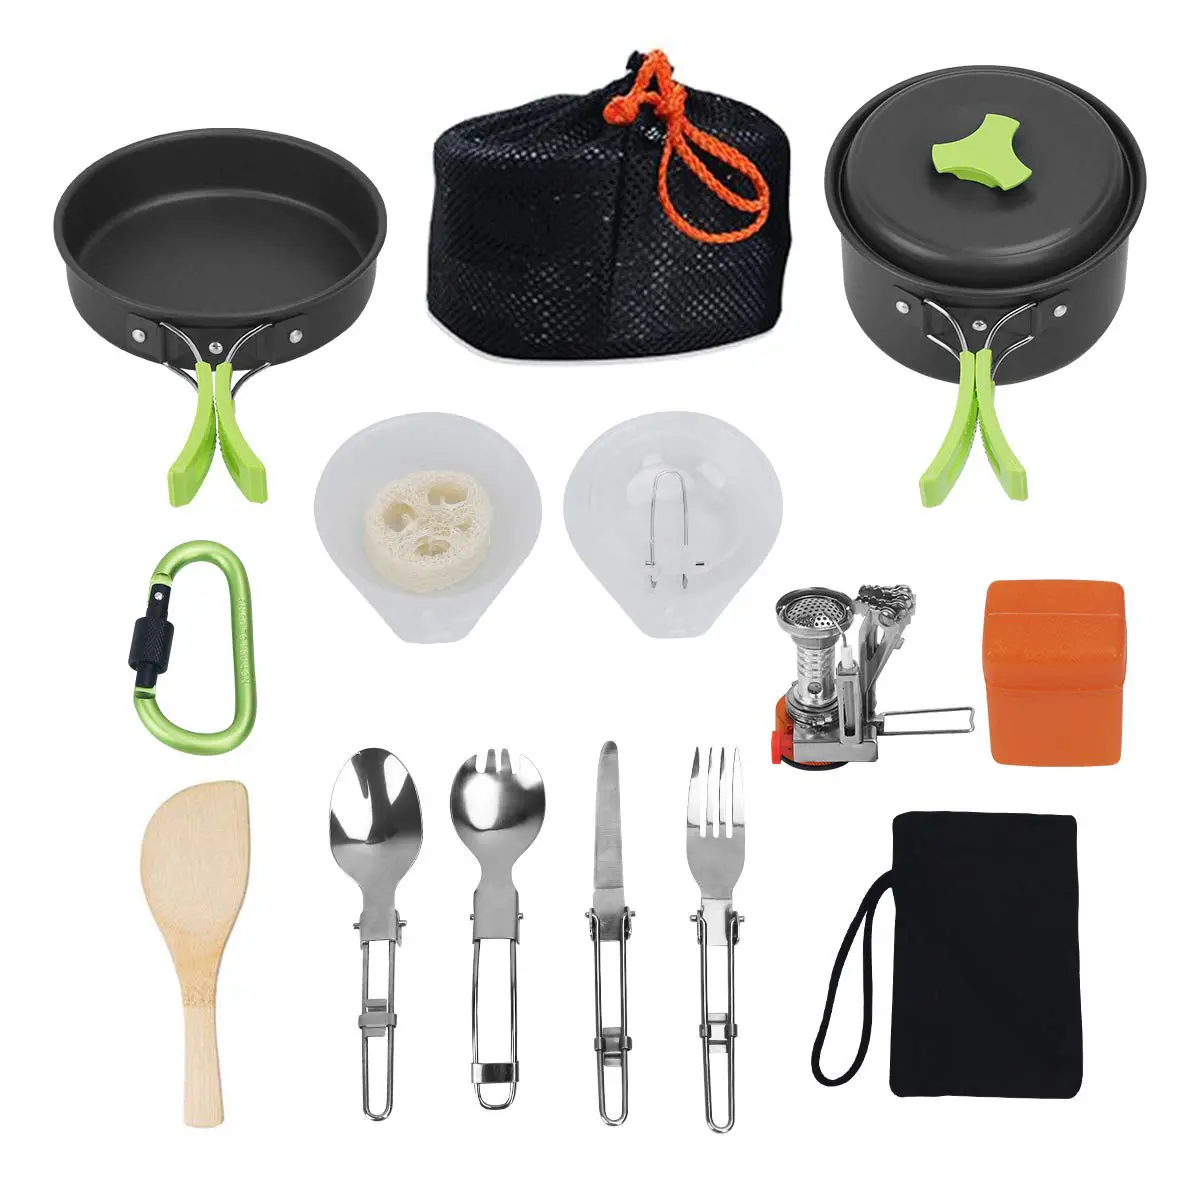 Your city 16pcs Hiking Backpacking Non stick Portable Outdoor Camping Cookware Set / Mess Kit / Cookset / Camp Kitchen